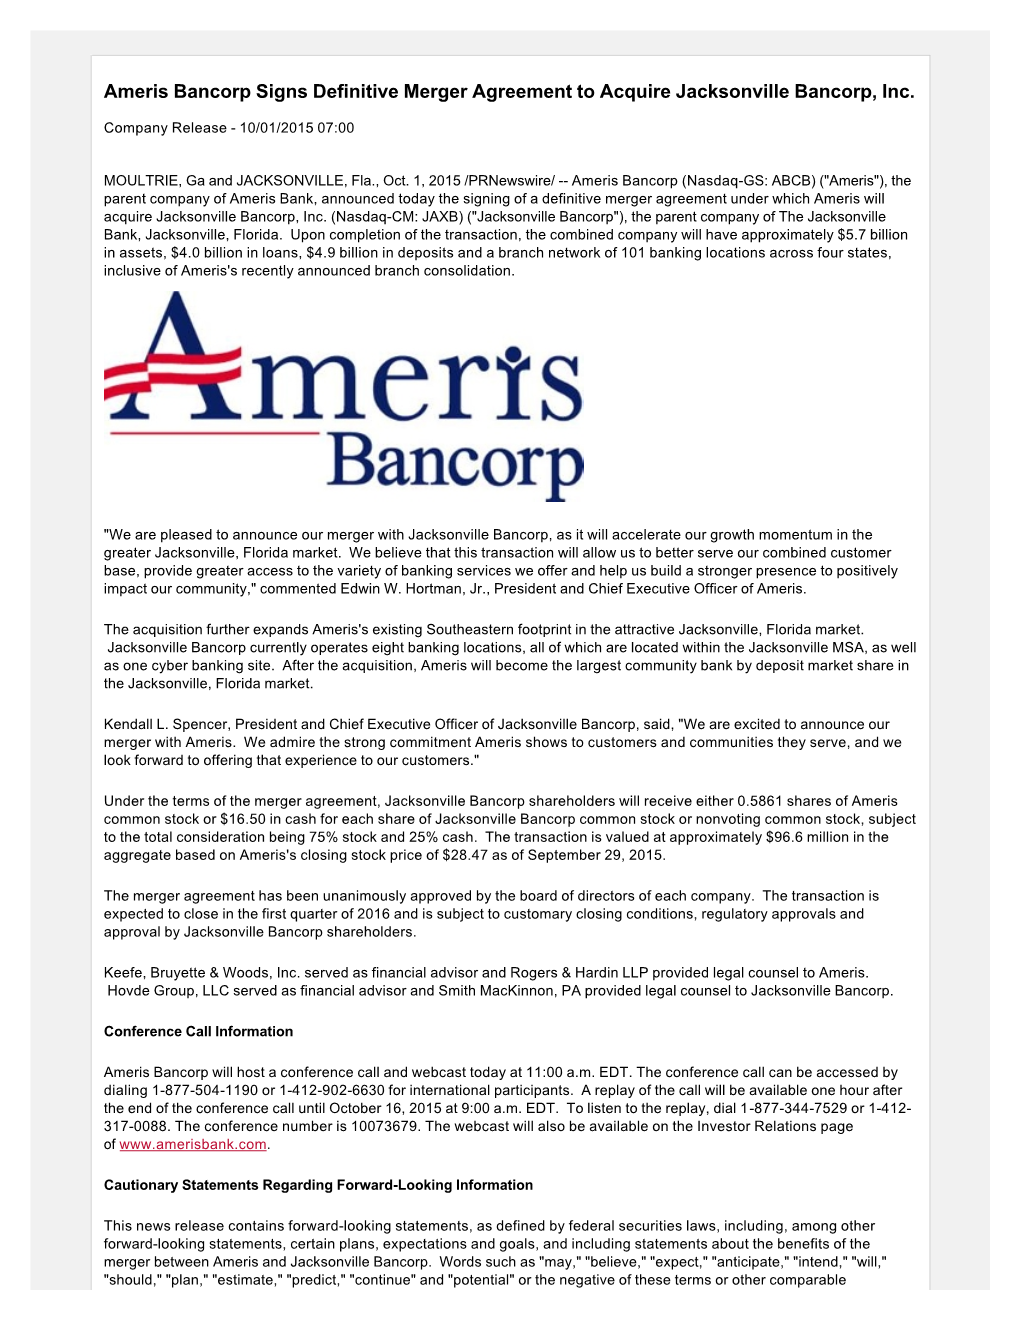 Ameris Bancorp Signs Definitive Merger Agreement to Acquire Jacksonville Bancorp, Inc